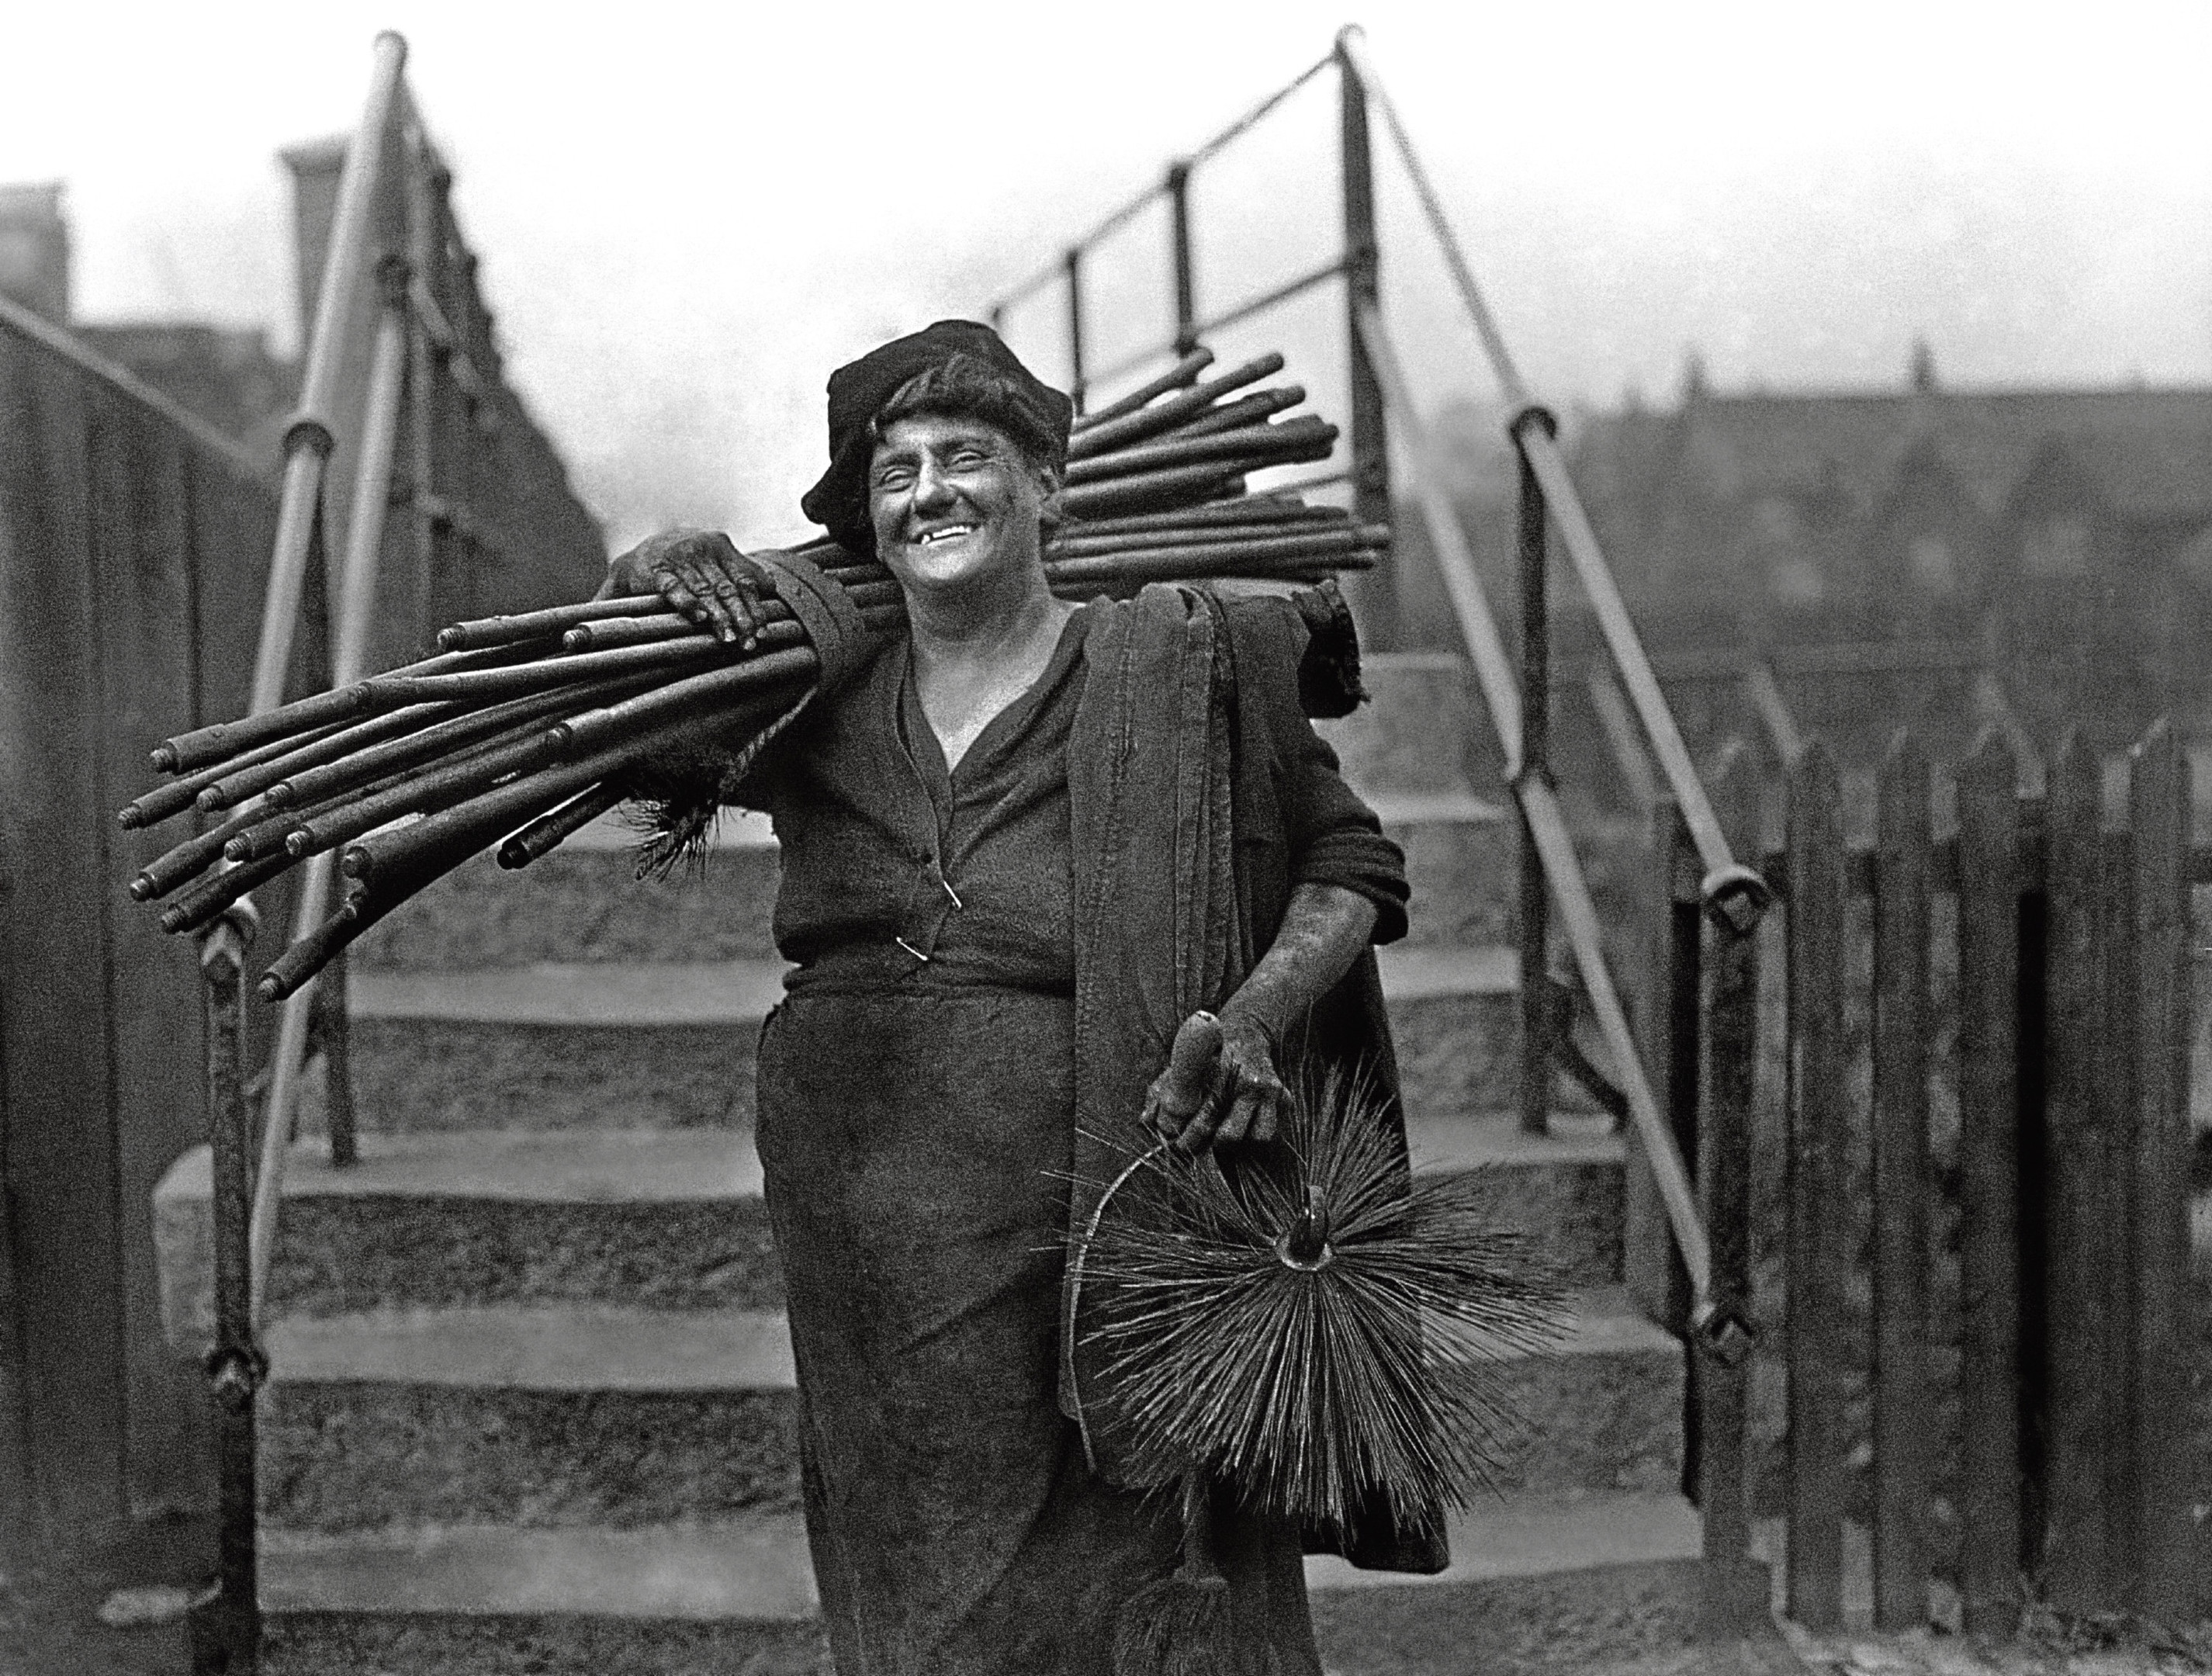 Former stage star May Nelson poses for a photographer after taking on her husbands occupation as a chimney sweep.